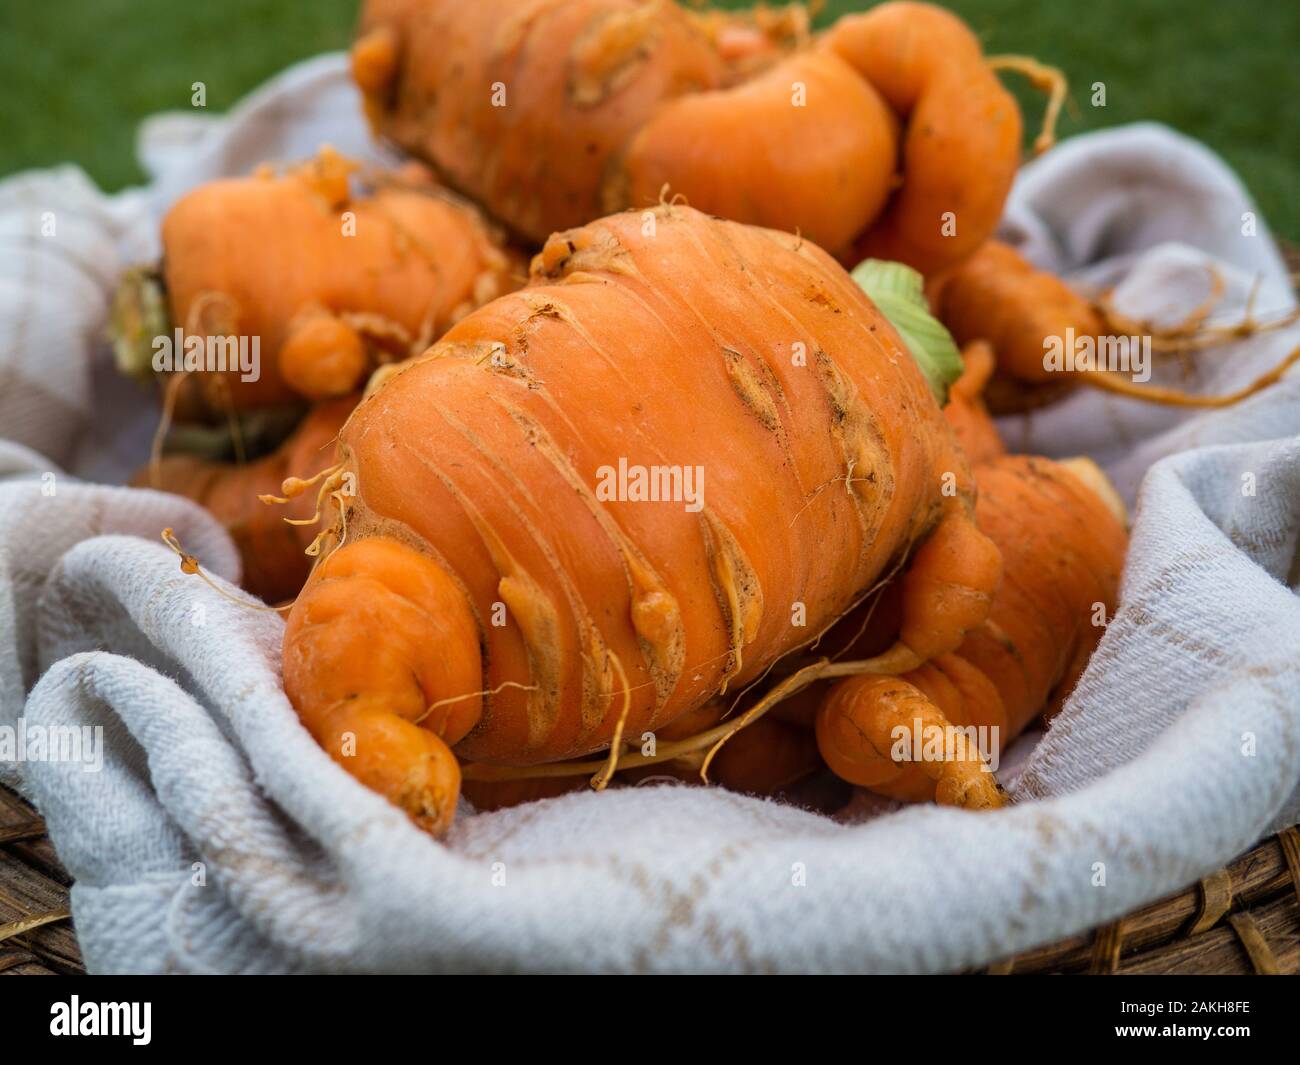 deformed carrots in a basket Stock Photo